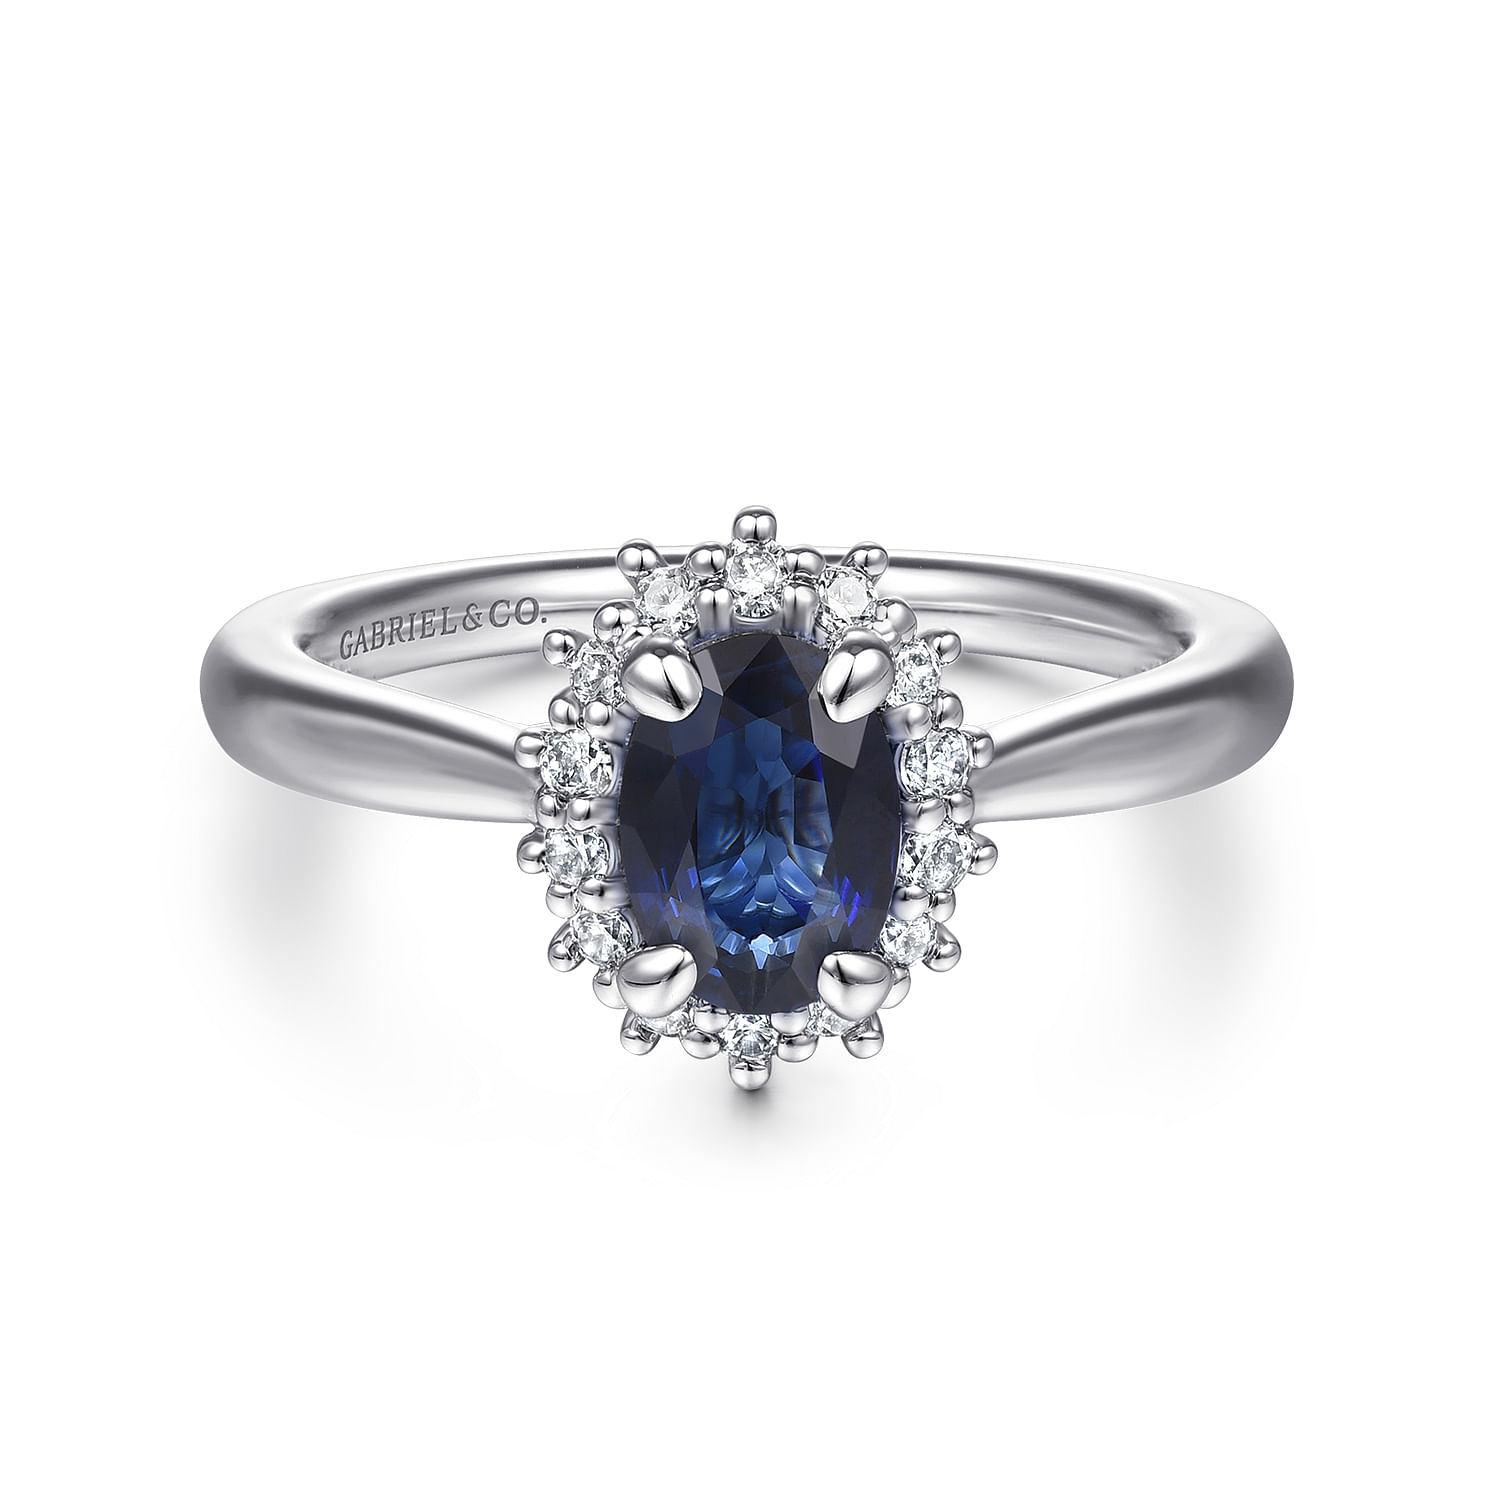 Fergie---14K-White-Gold-Oval-Halo-Sapphire-and-Diamond-Engagement-Ring1